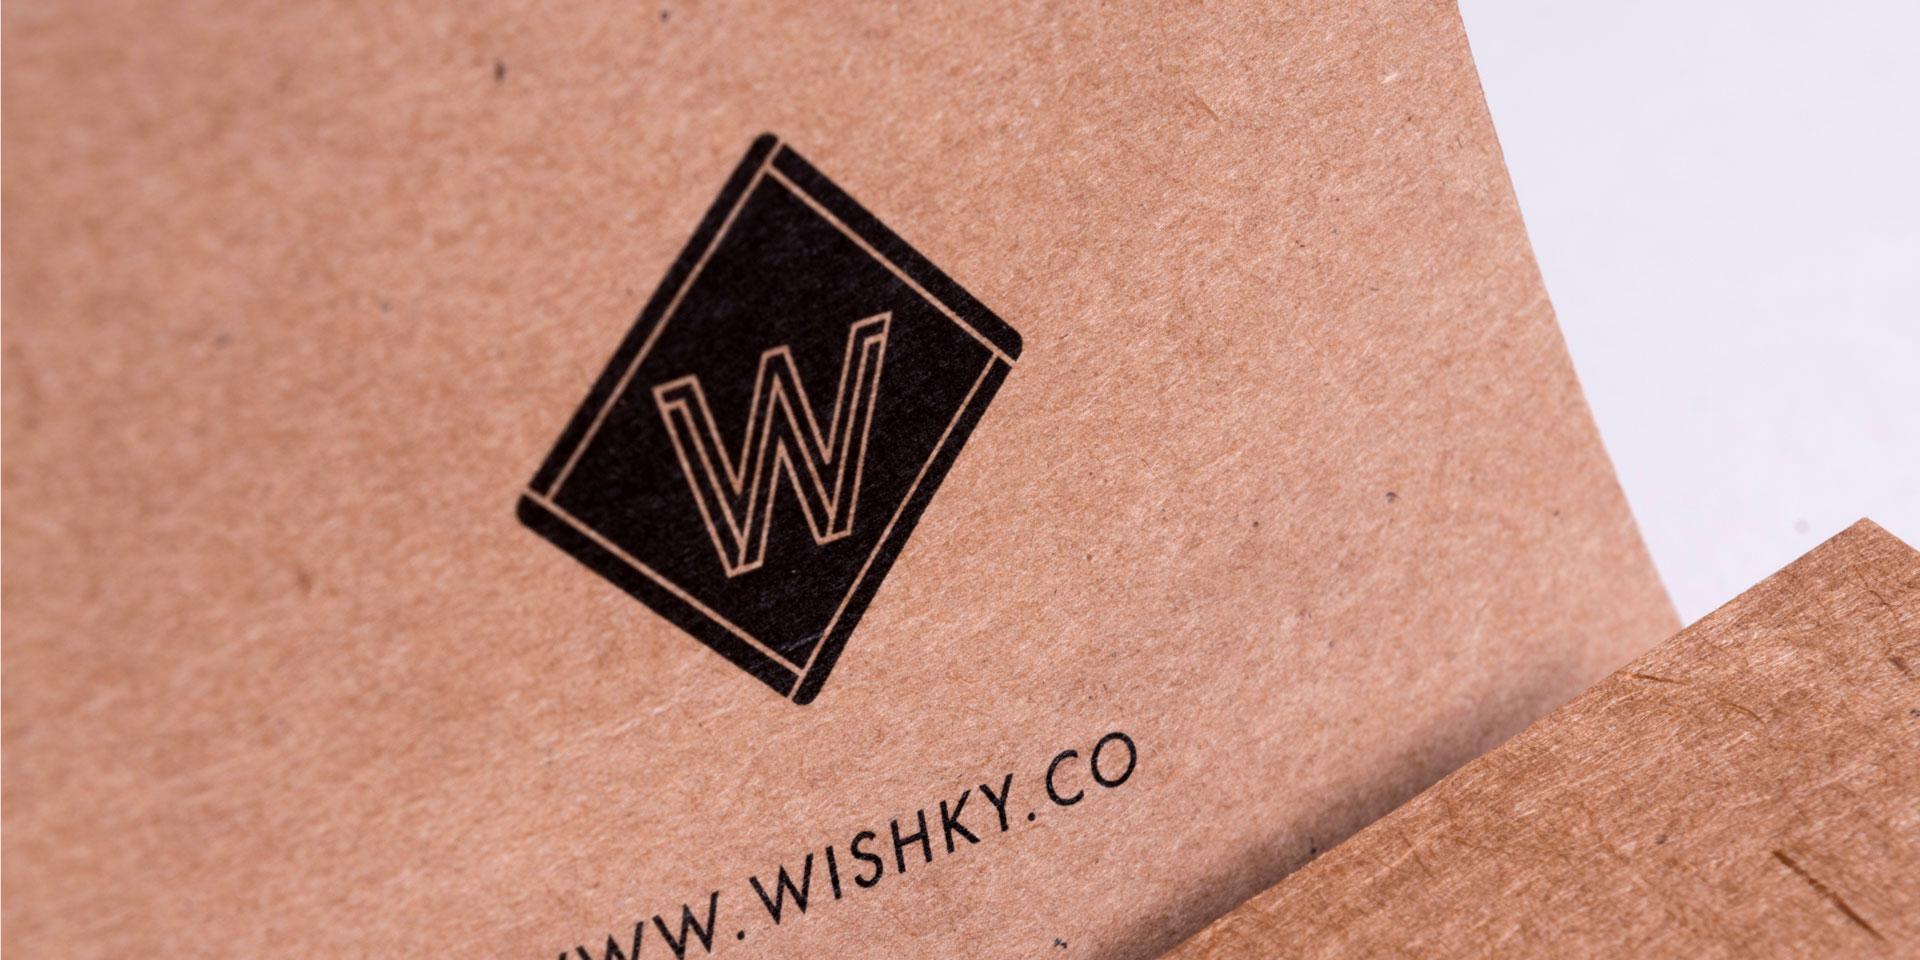 Product: Brand, packaging & web design for Wishky - The Design Attic